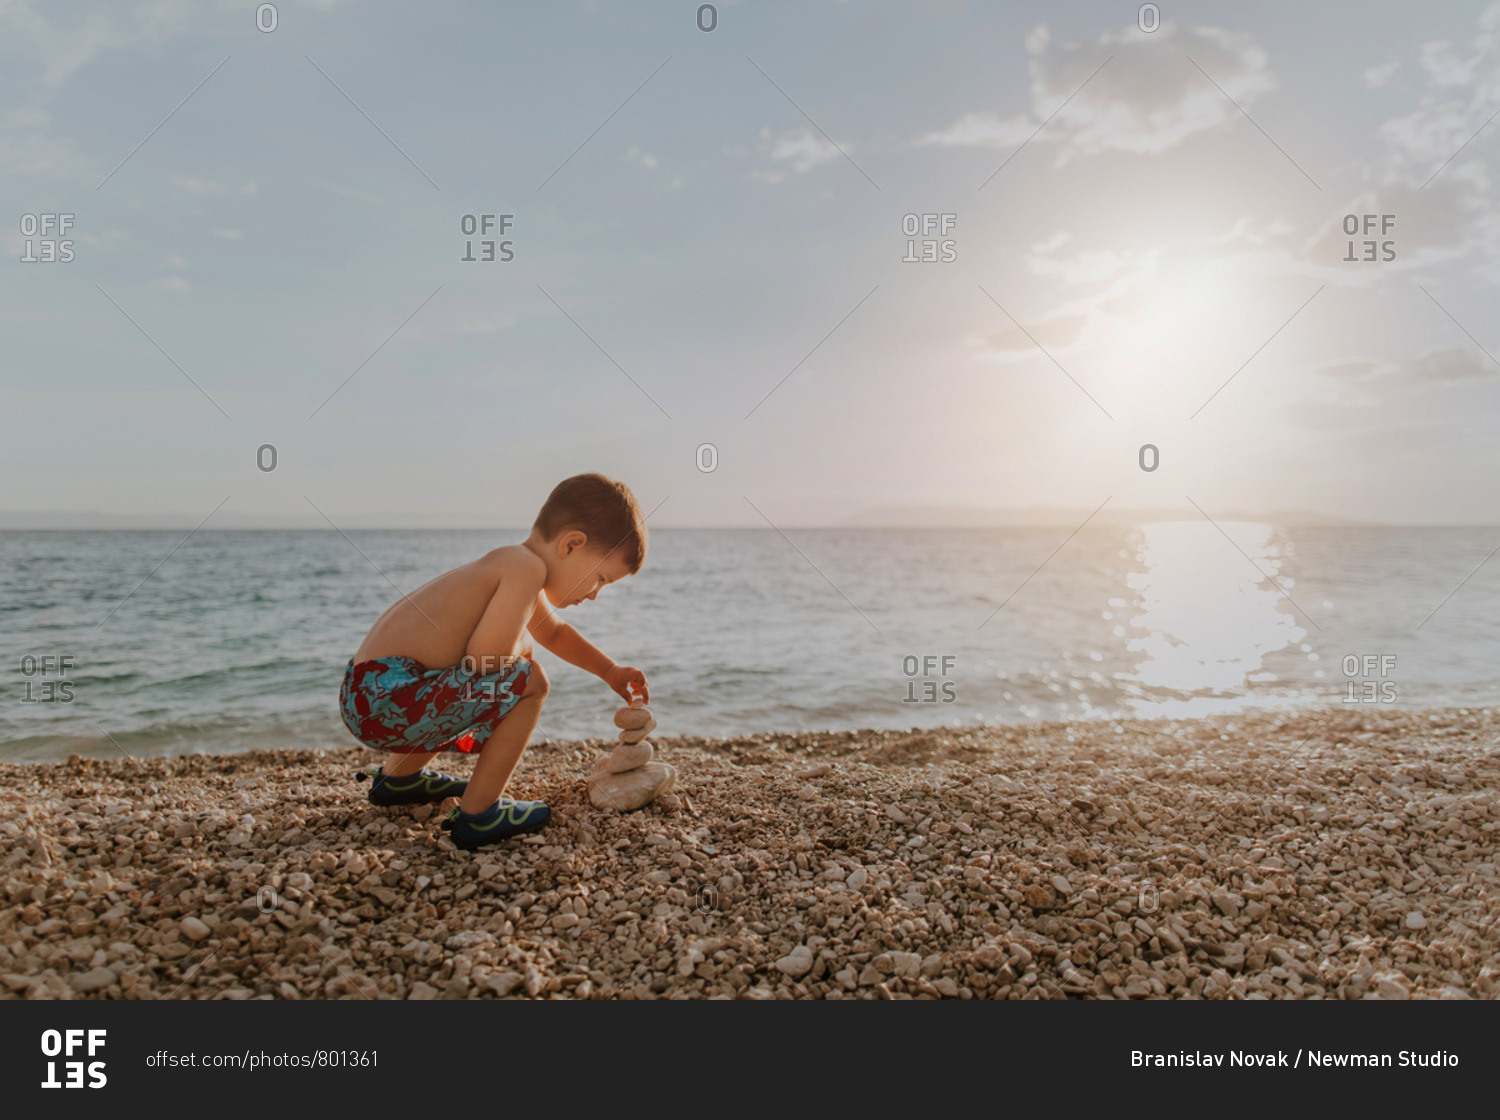 Child playing with stones on beach on his own at sunset. Young boy wearing summer shorts stacking pebbles on beach in the evening.